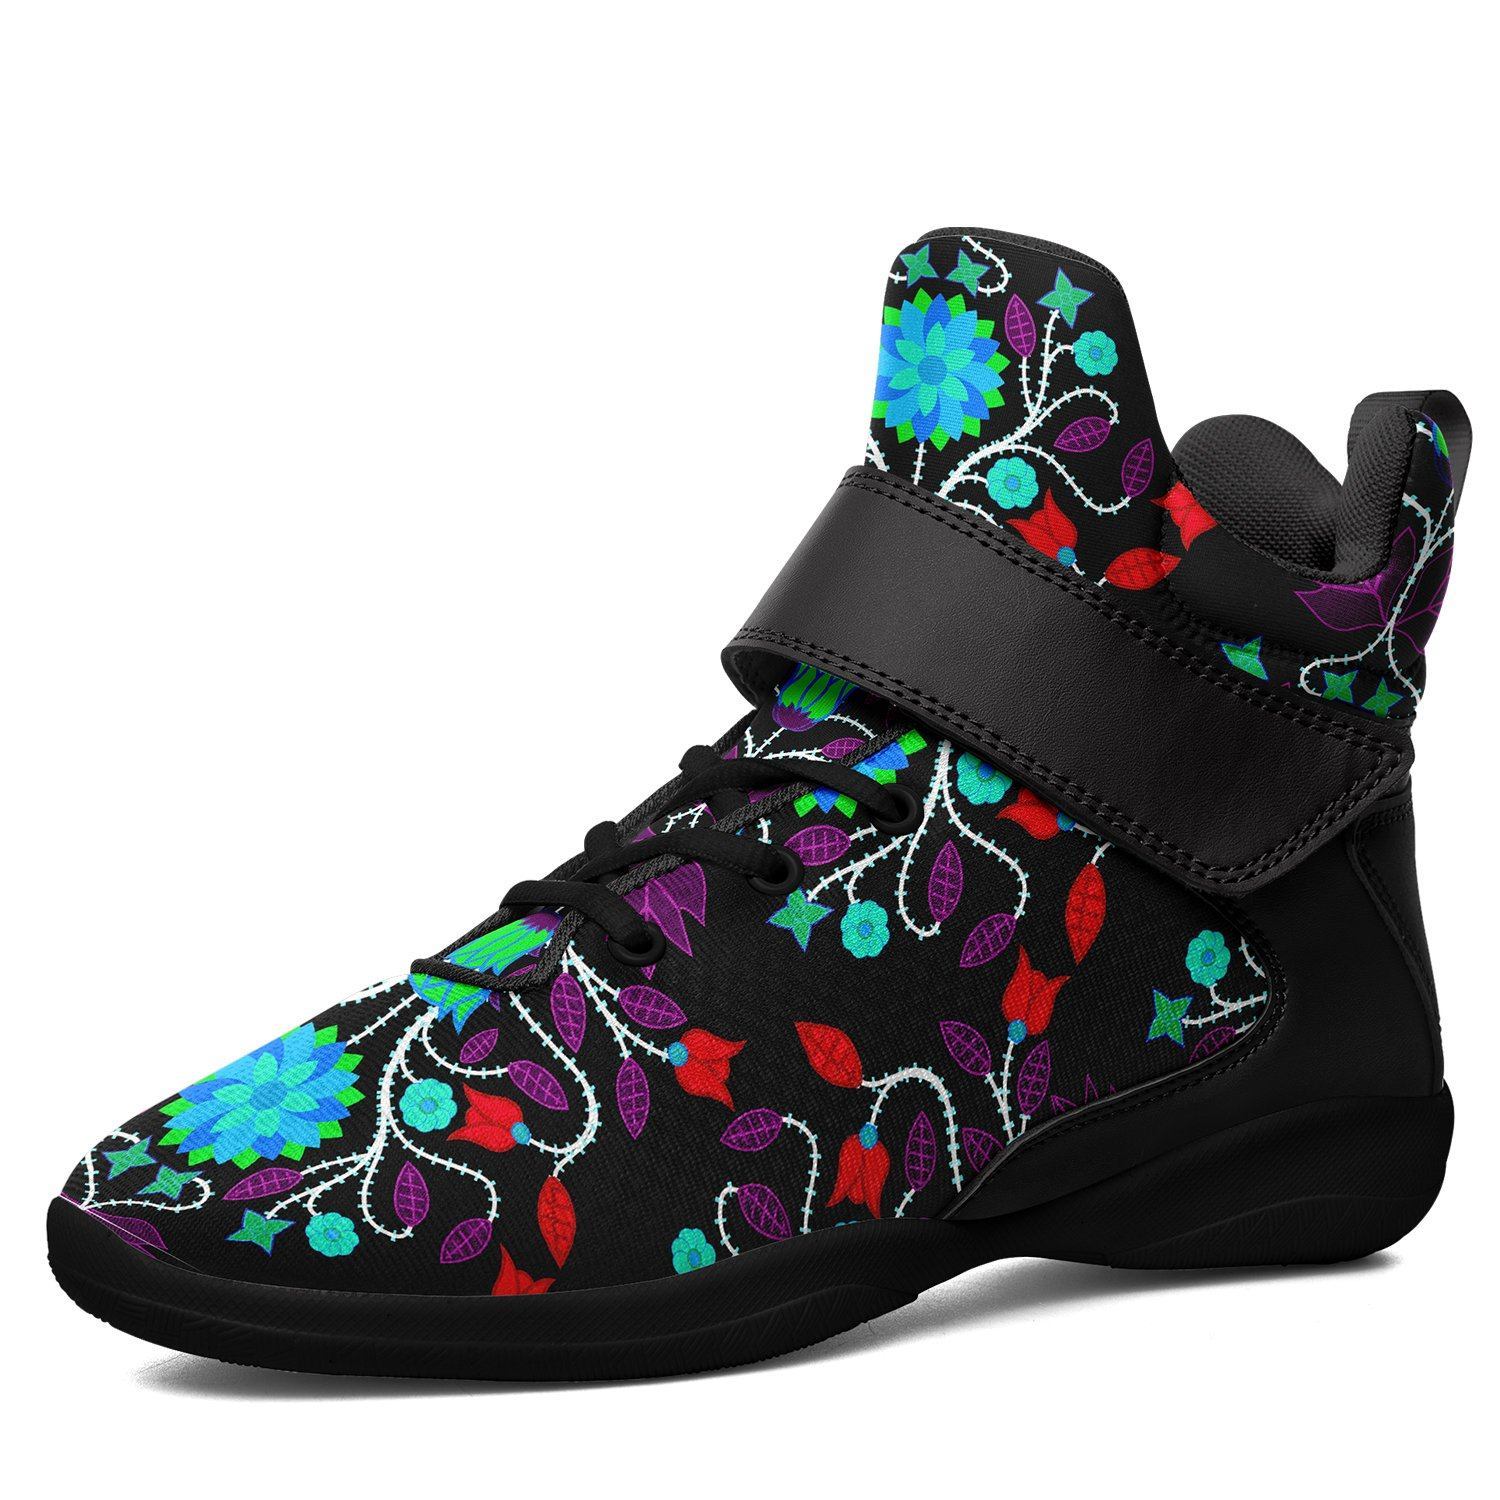 Floral Beadwork Four Clans Winter Ipottaa Basketball / Sport High Top Shoes - Black Sole 49 Dzine US Men 7 / EUR 40 Black Sole with Black Strap 